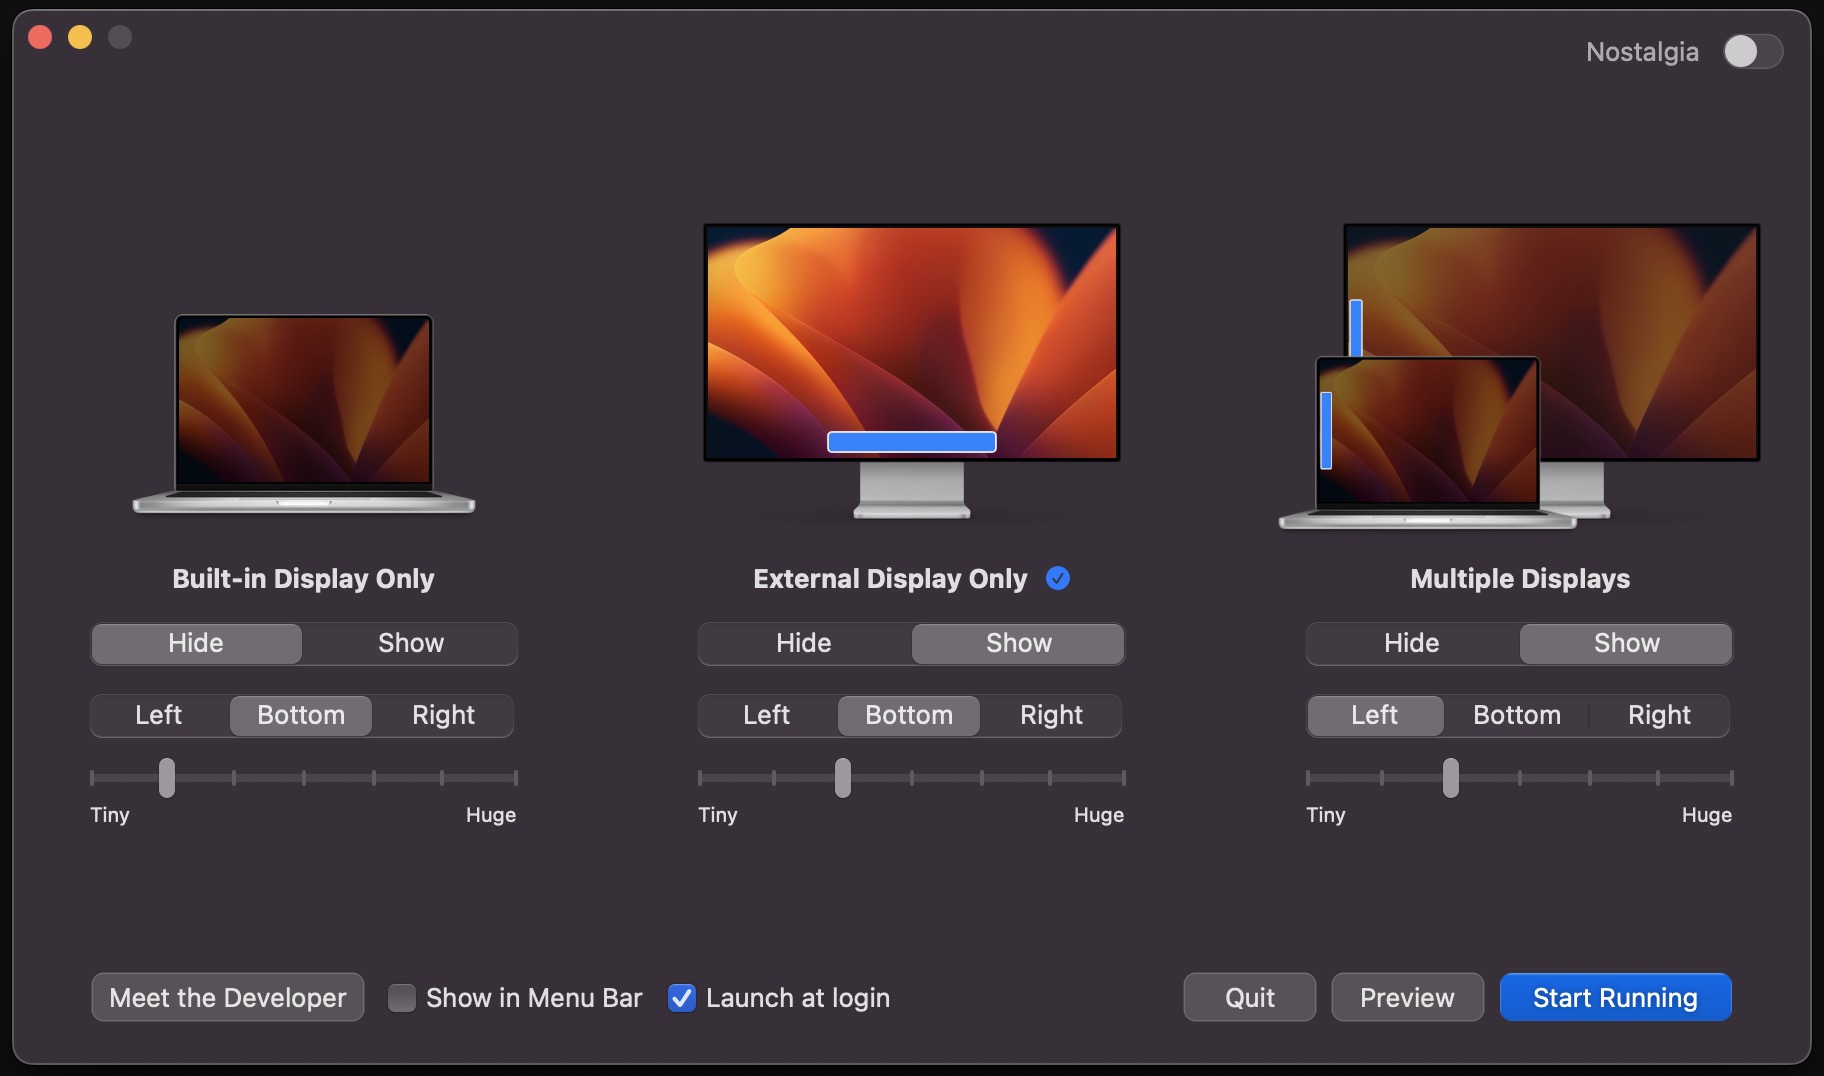 Set Custom Dock Settings for Mac When Connected to External Displays with HiDock